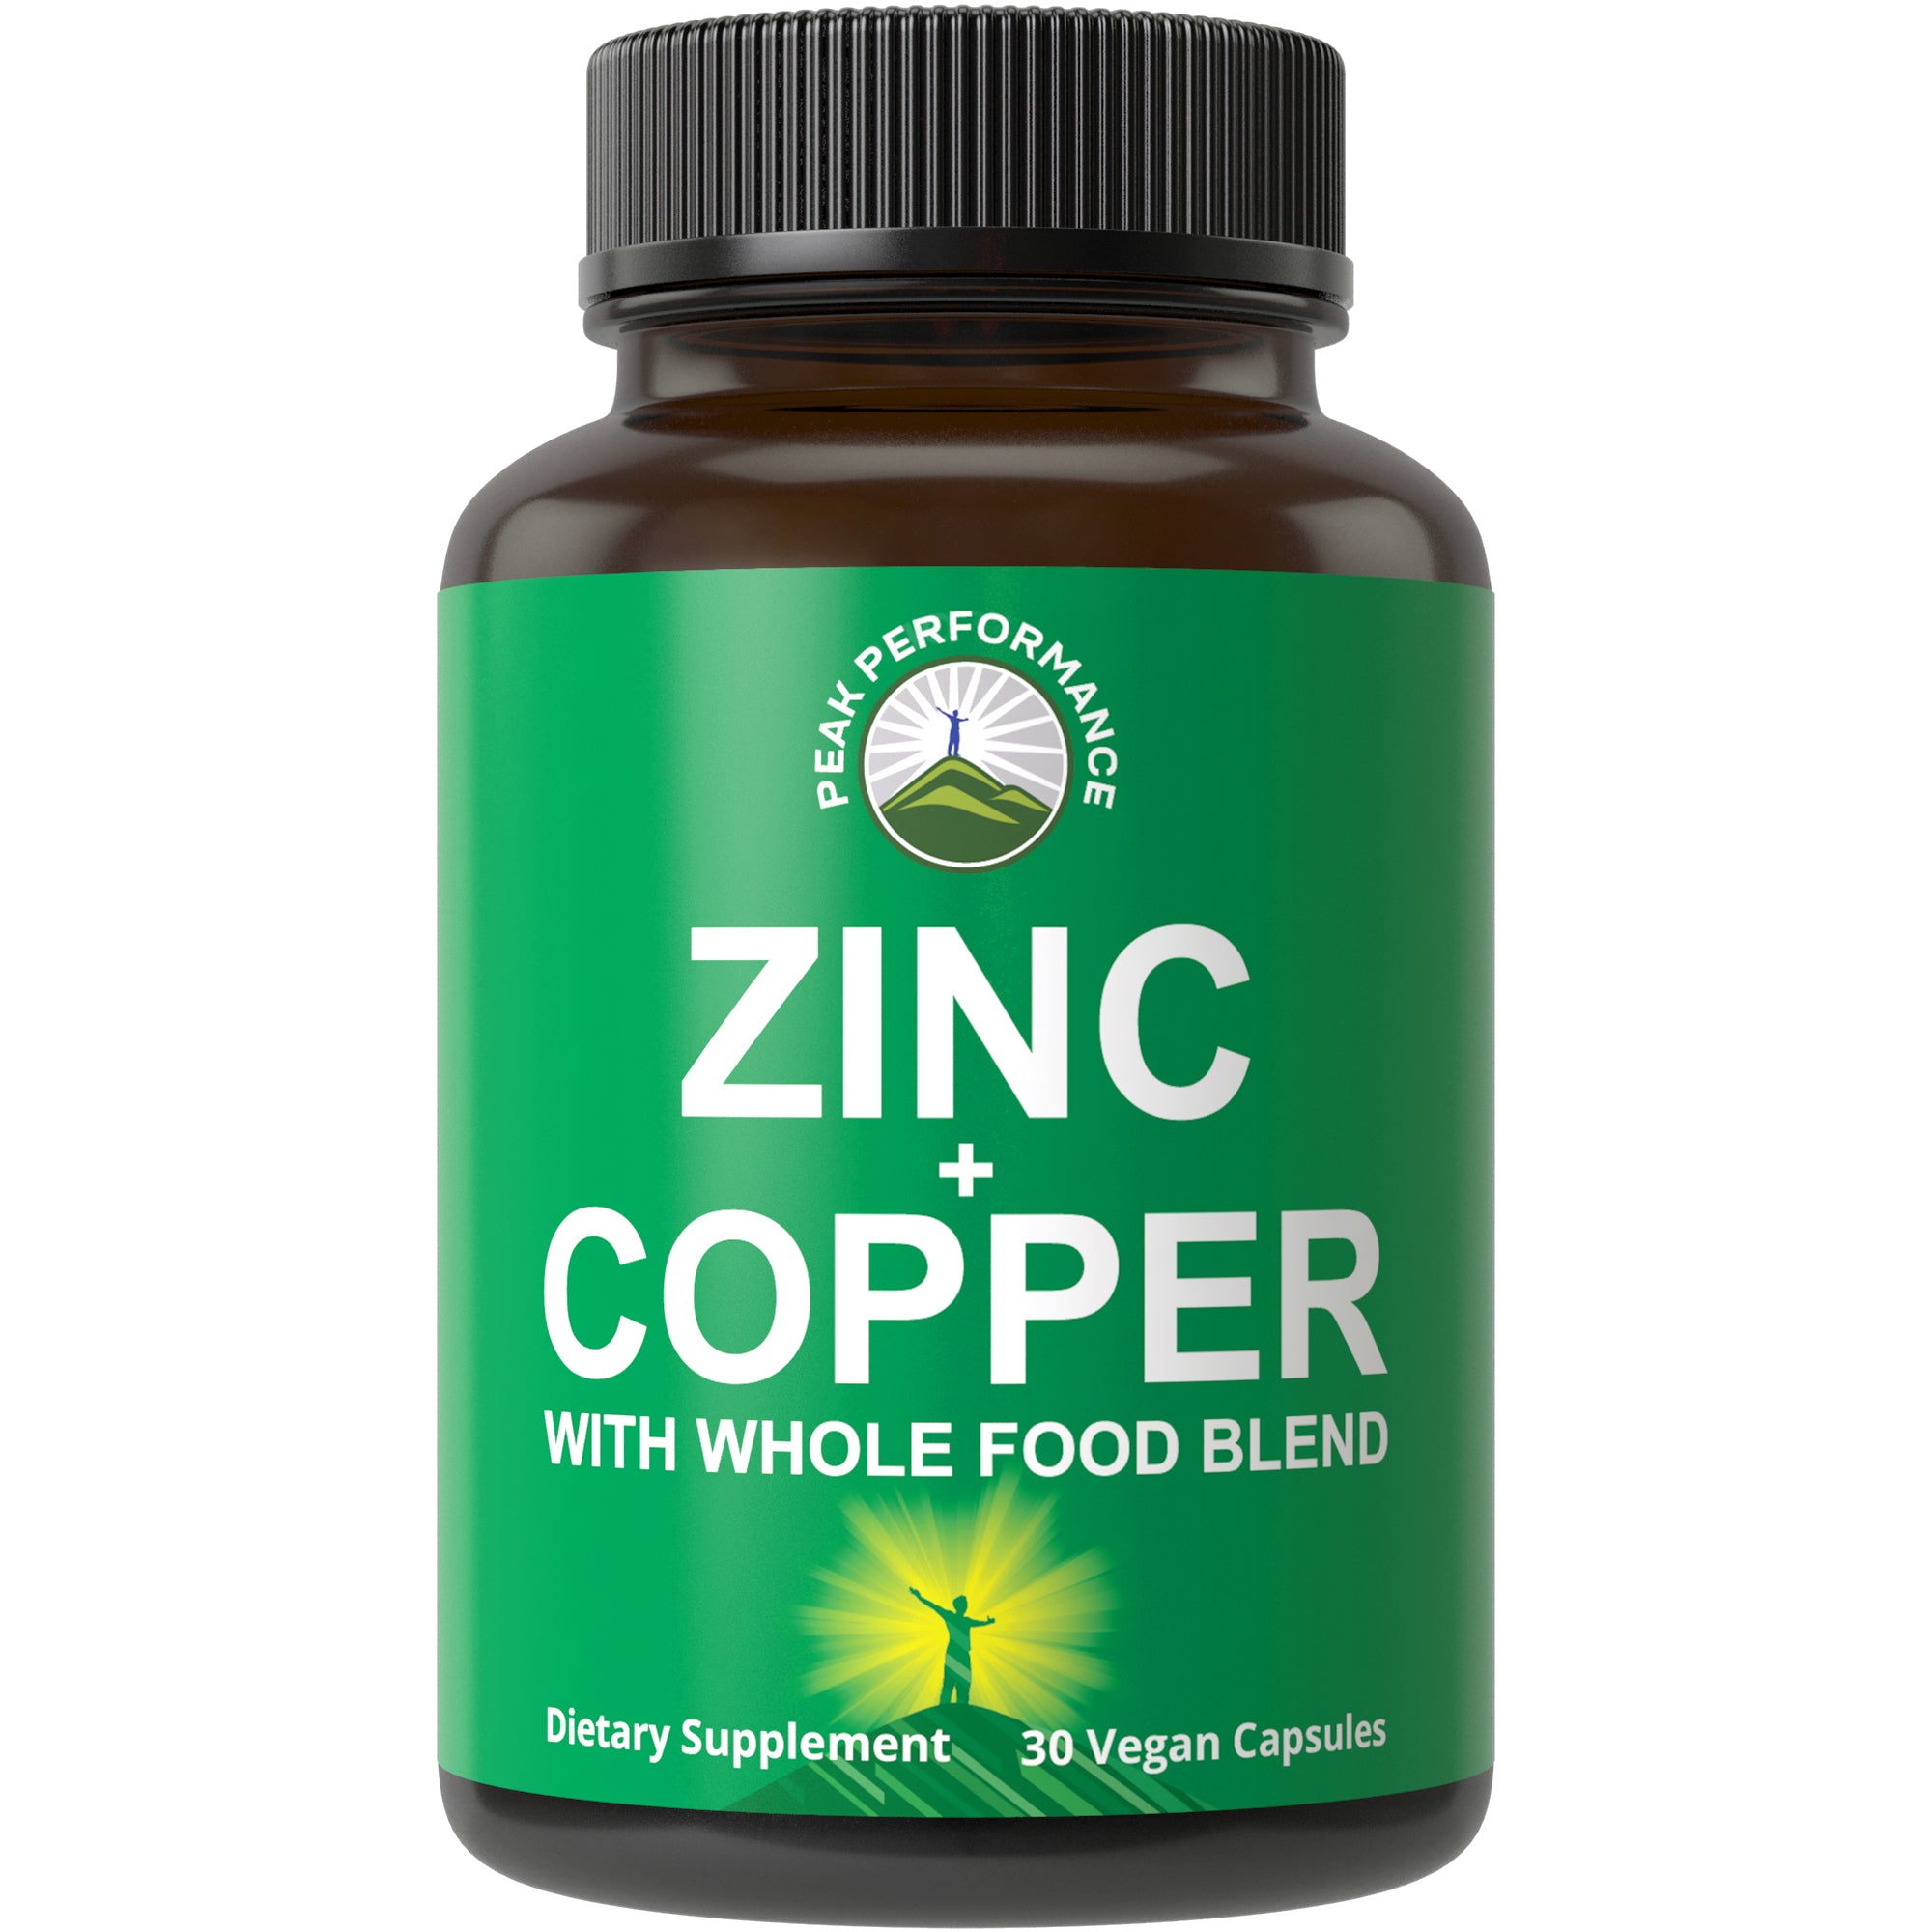 Zinc with Copper + Whole Food Blend of 25 Vegetables and Fruits